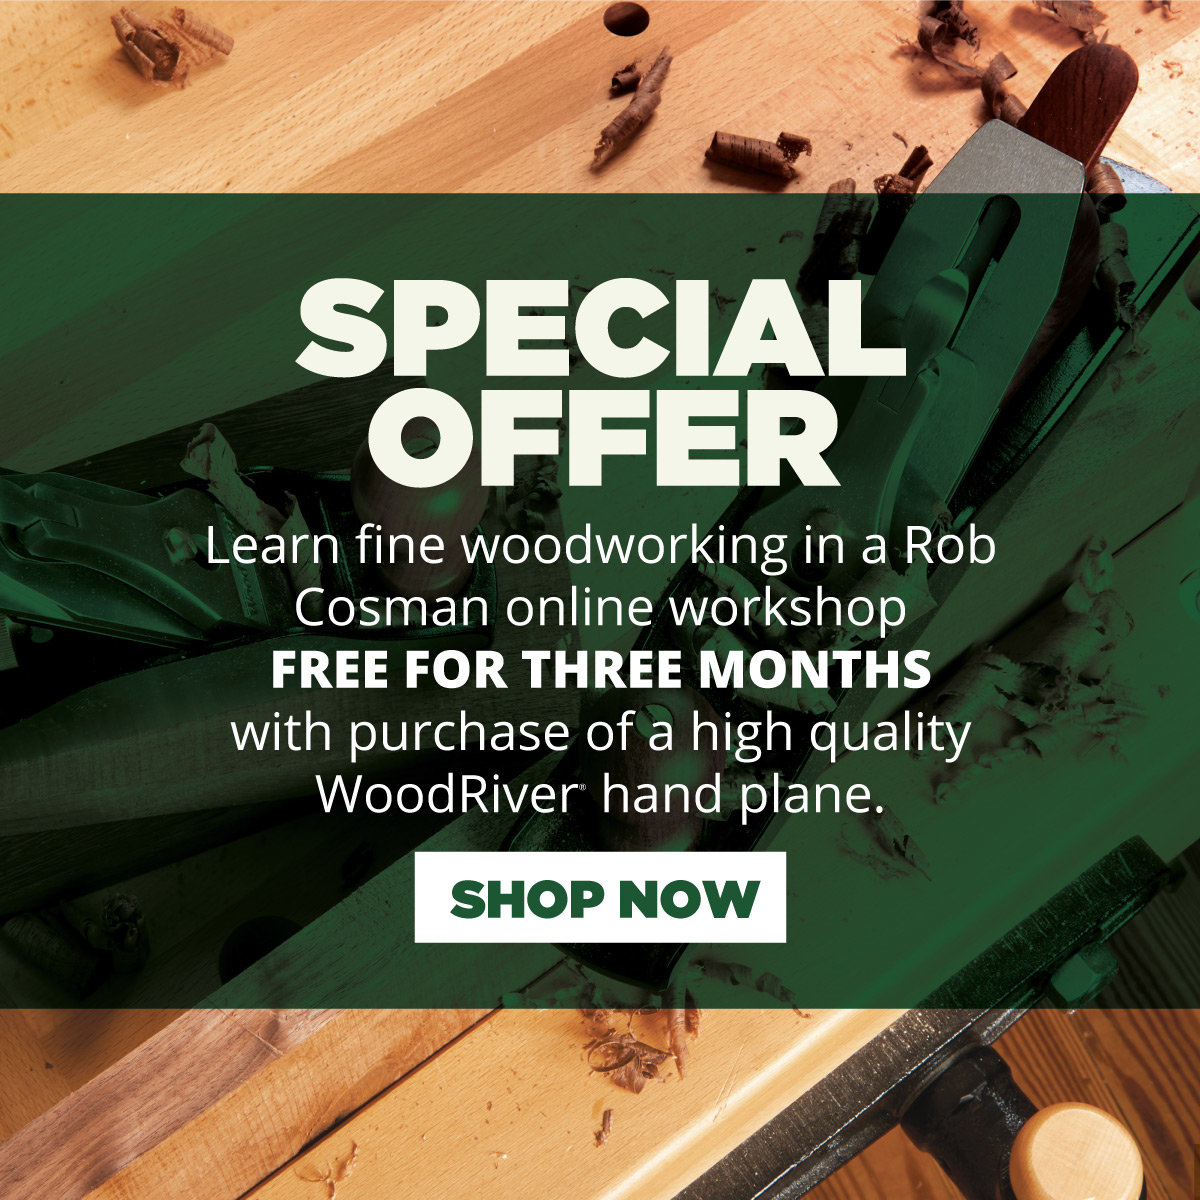 SPECIAL OFFER - Learn fine woodworking in a Rob Cosman Online Workshop FREE FOR THREE MONTHS with purchase of a high quality WoodRiver® Hand Plane – Over $100 Value!